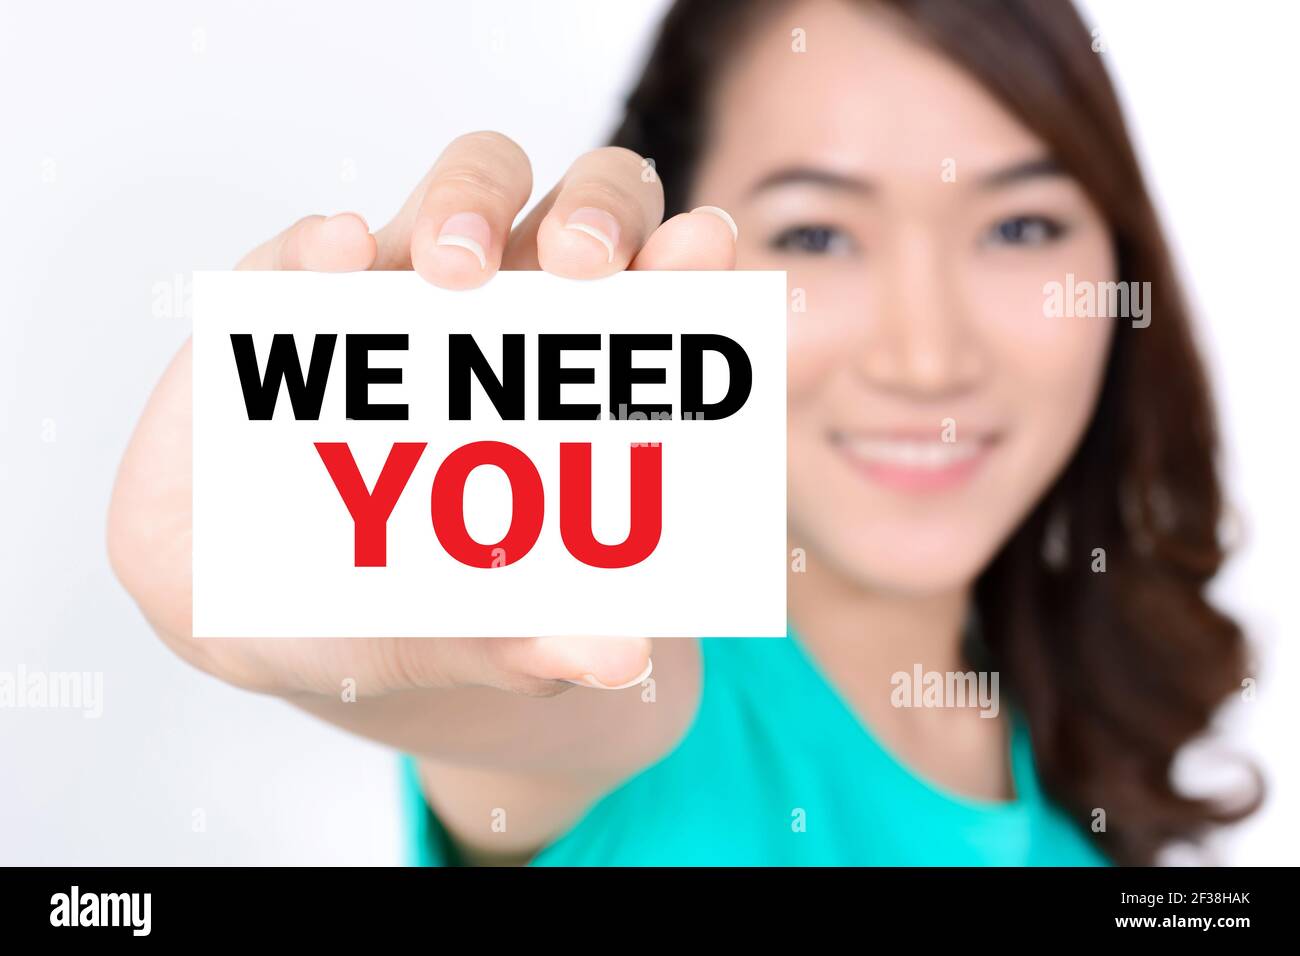 WE NEED YOU, message on the card shown by a woman Stock Photo